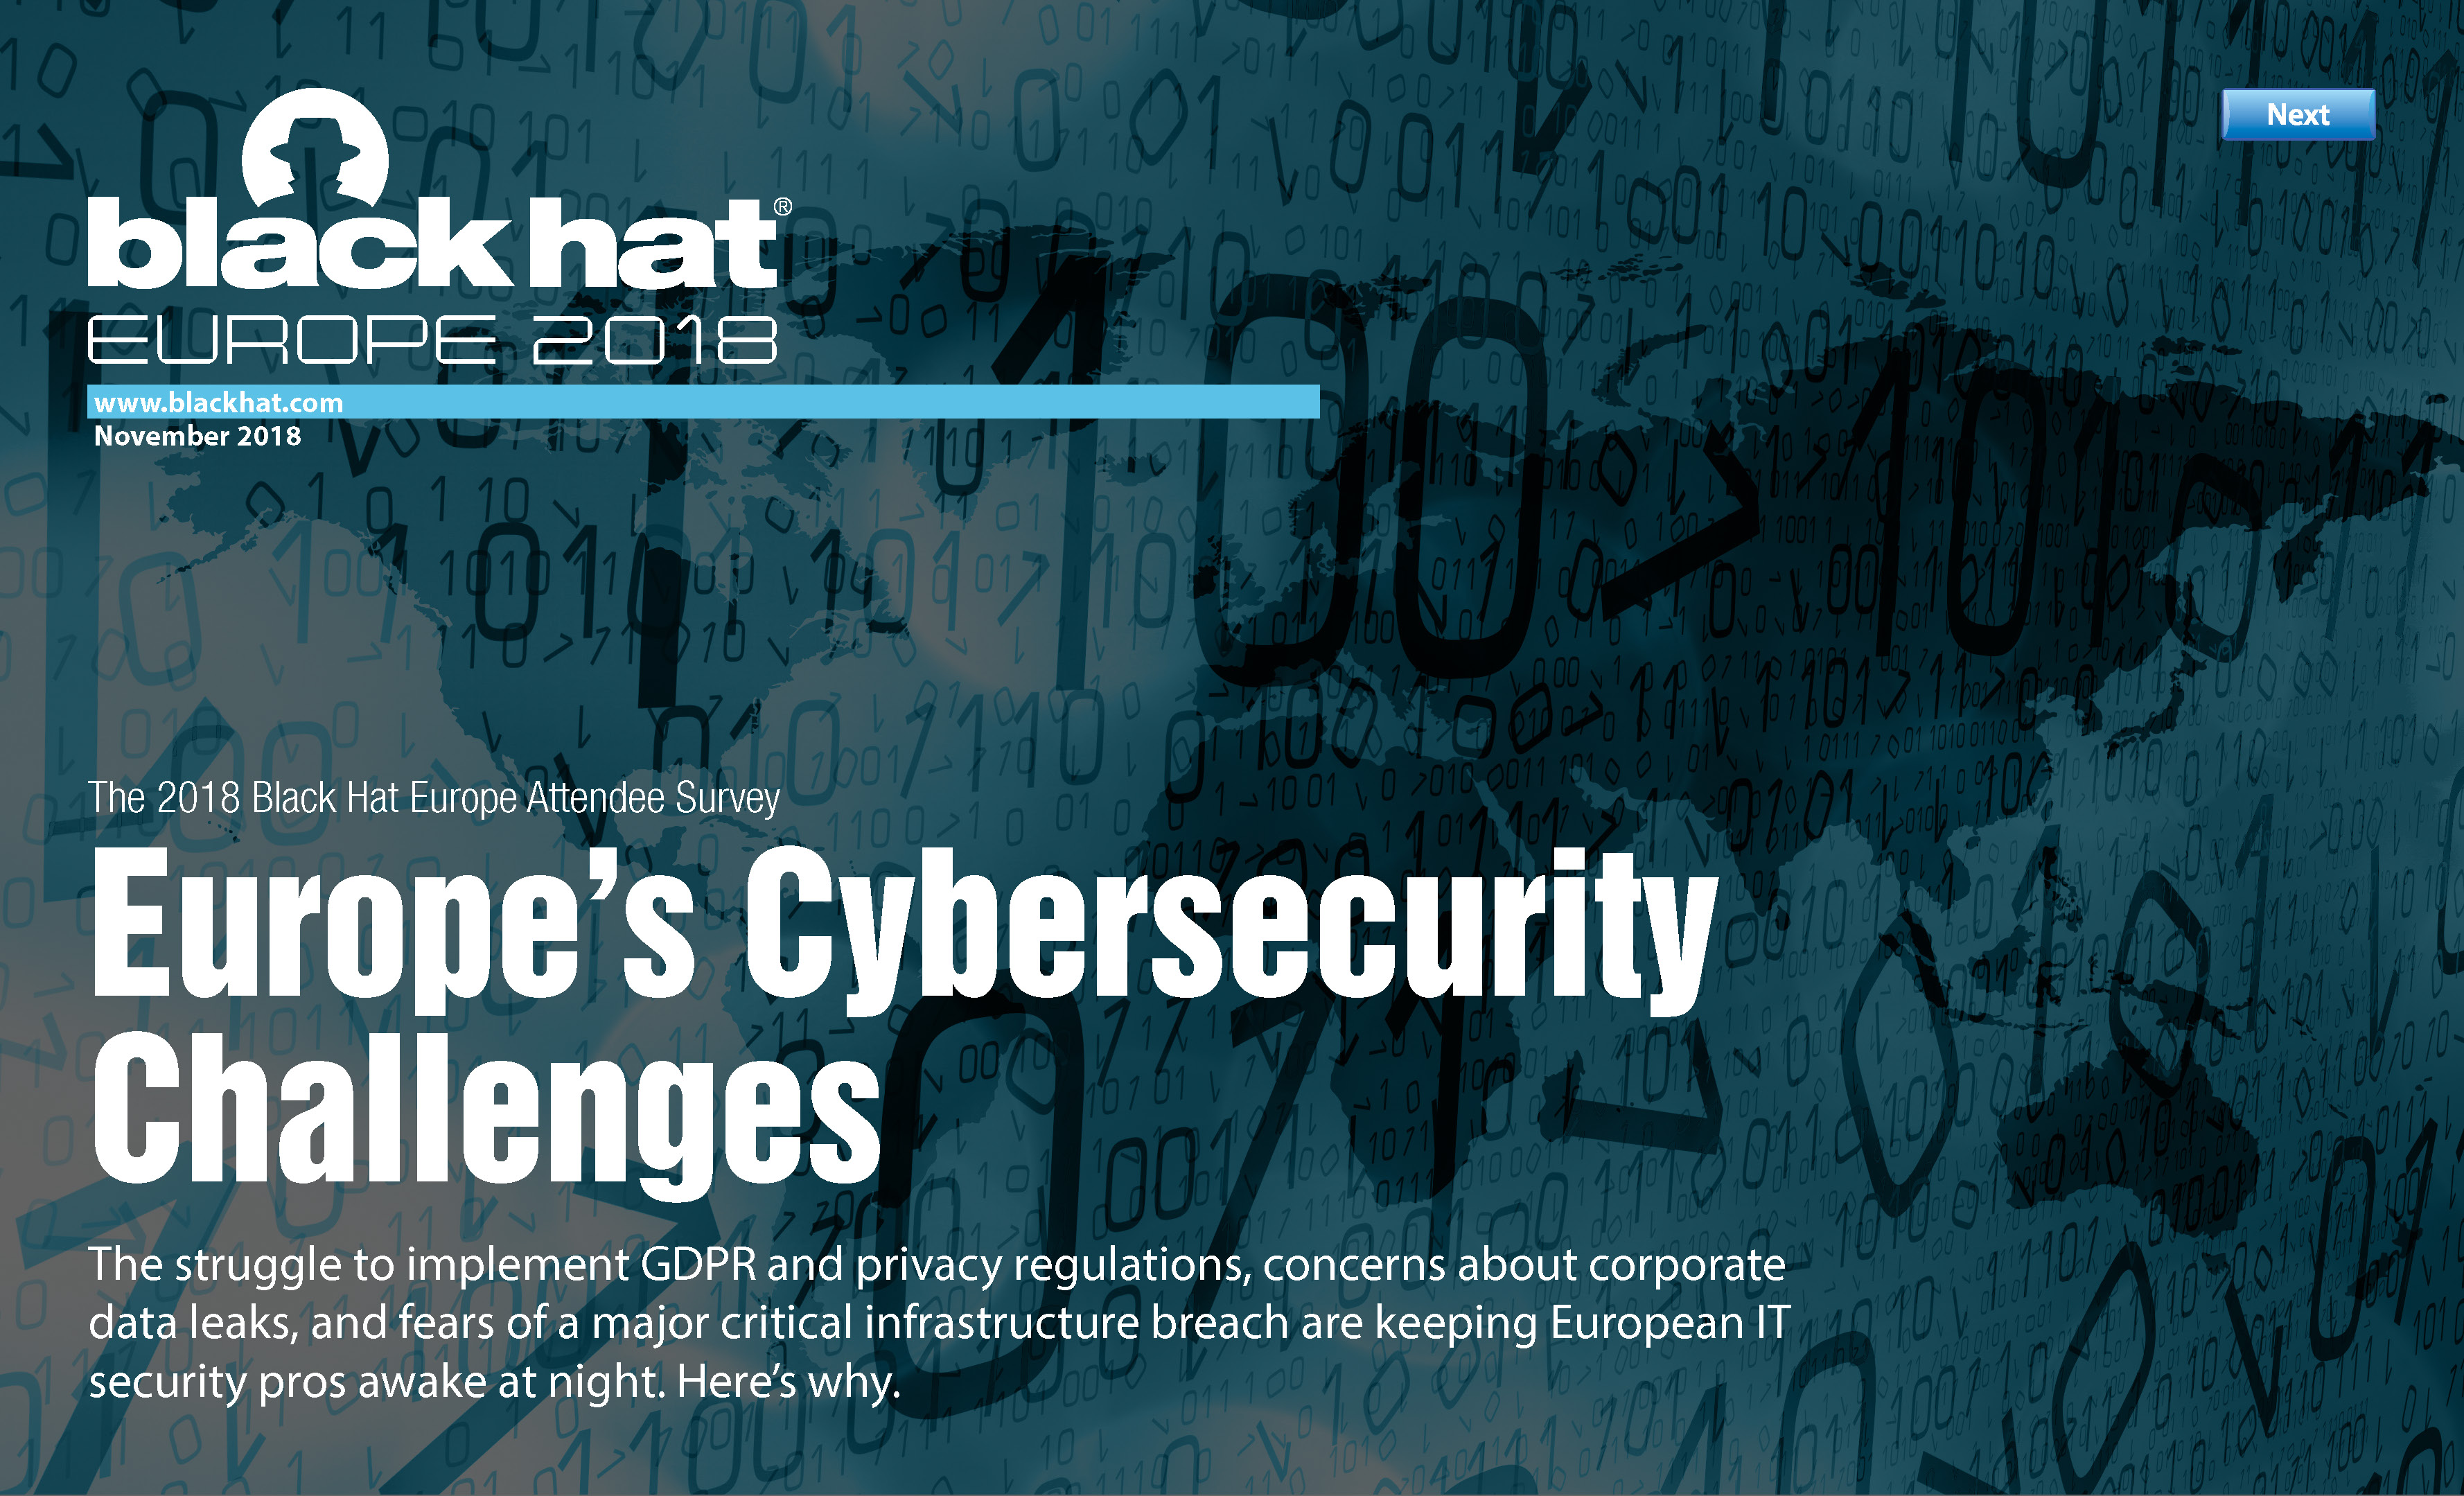 Black Hat Europe 2018 Europe's Cybersecurity Challenges